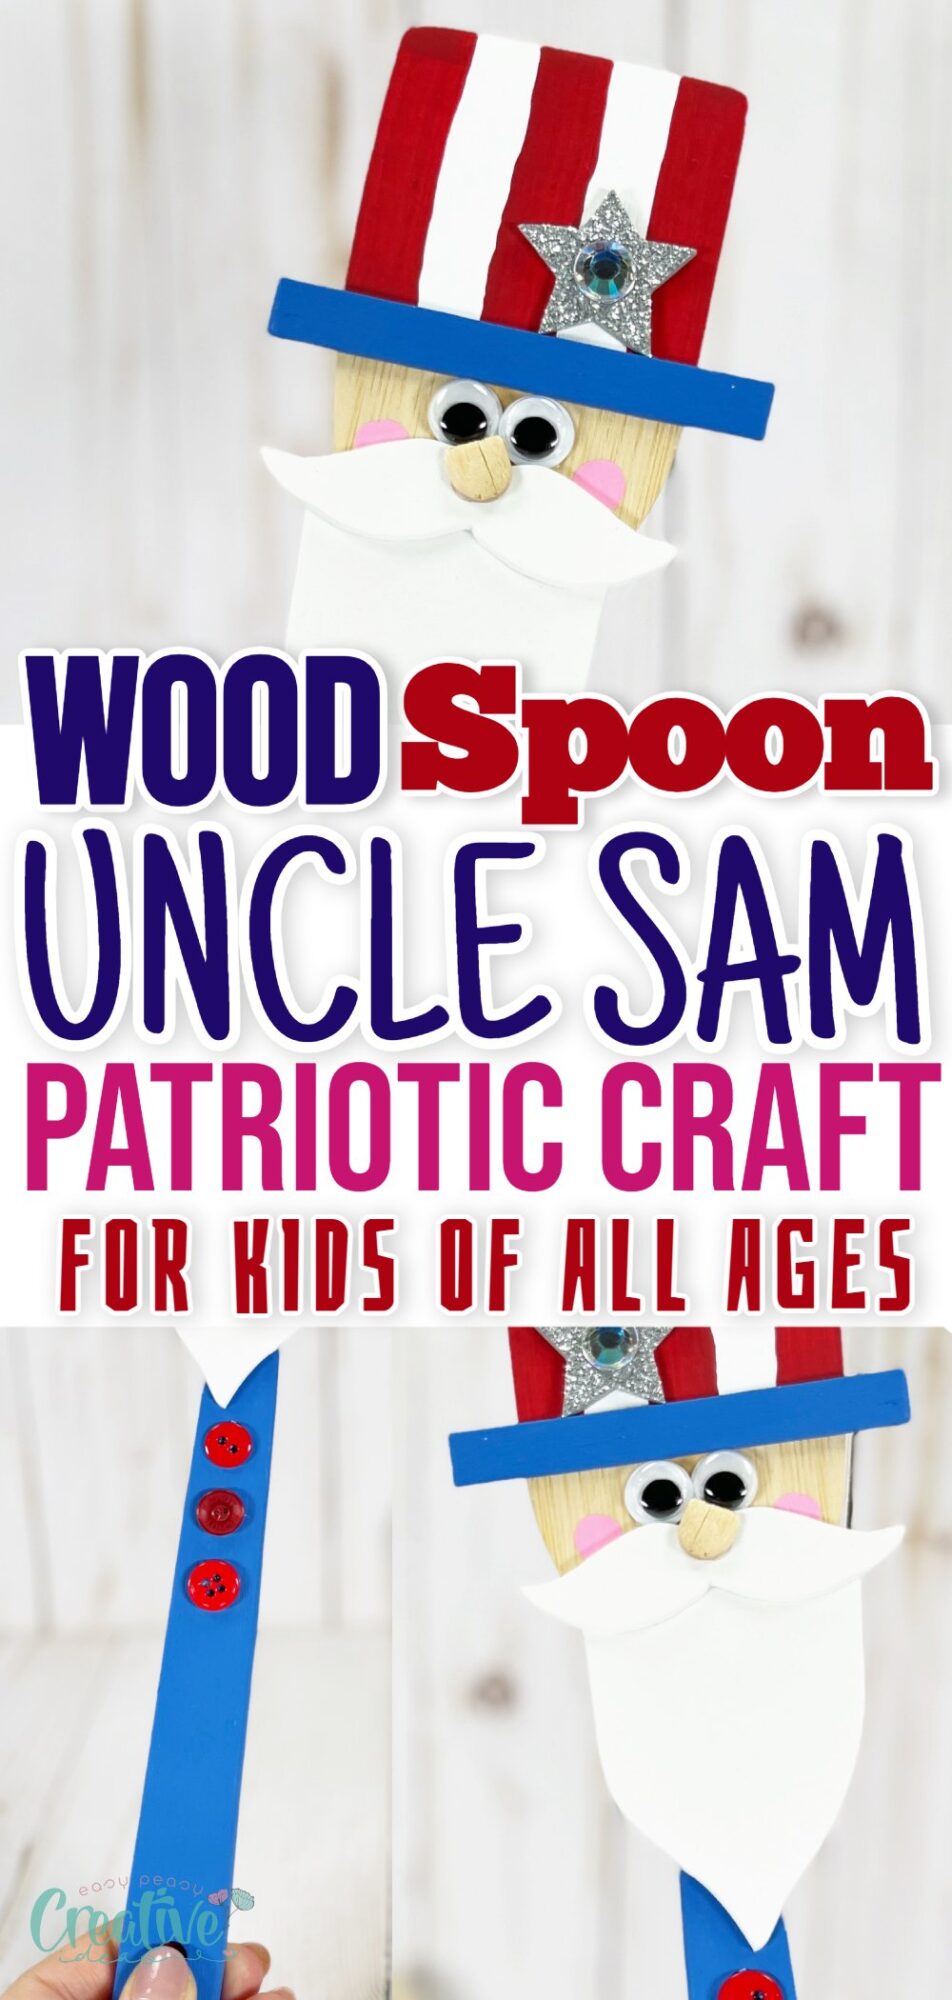 Get crafty with a patriotic Uncle Sam craft project! Fun and simple for everyone, it brings a pop of red, white, and blue to any party.